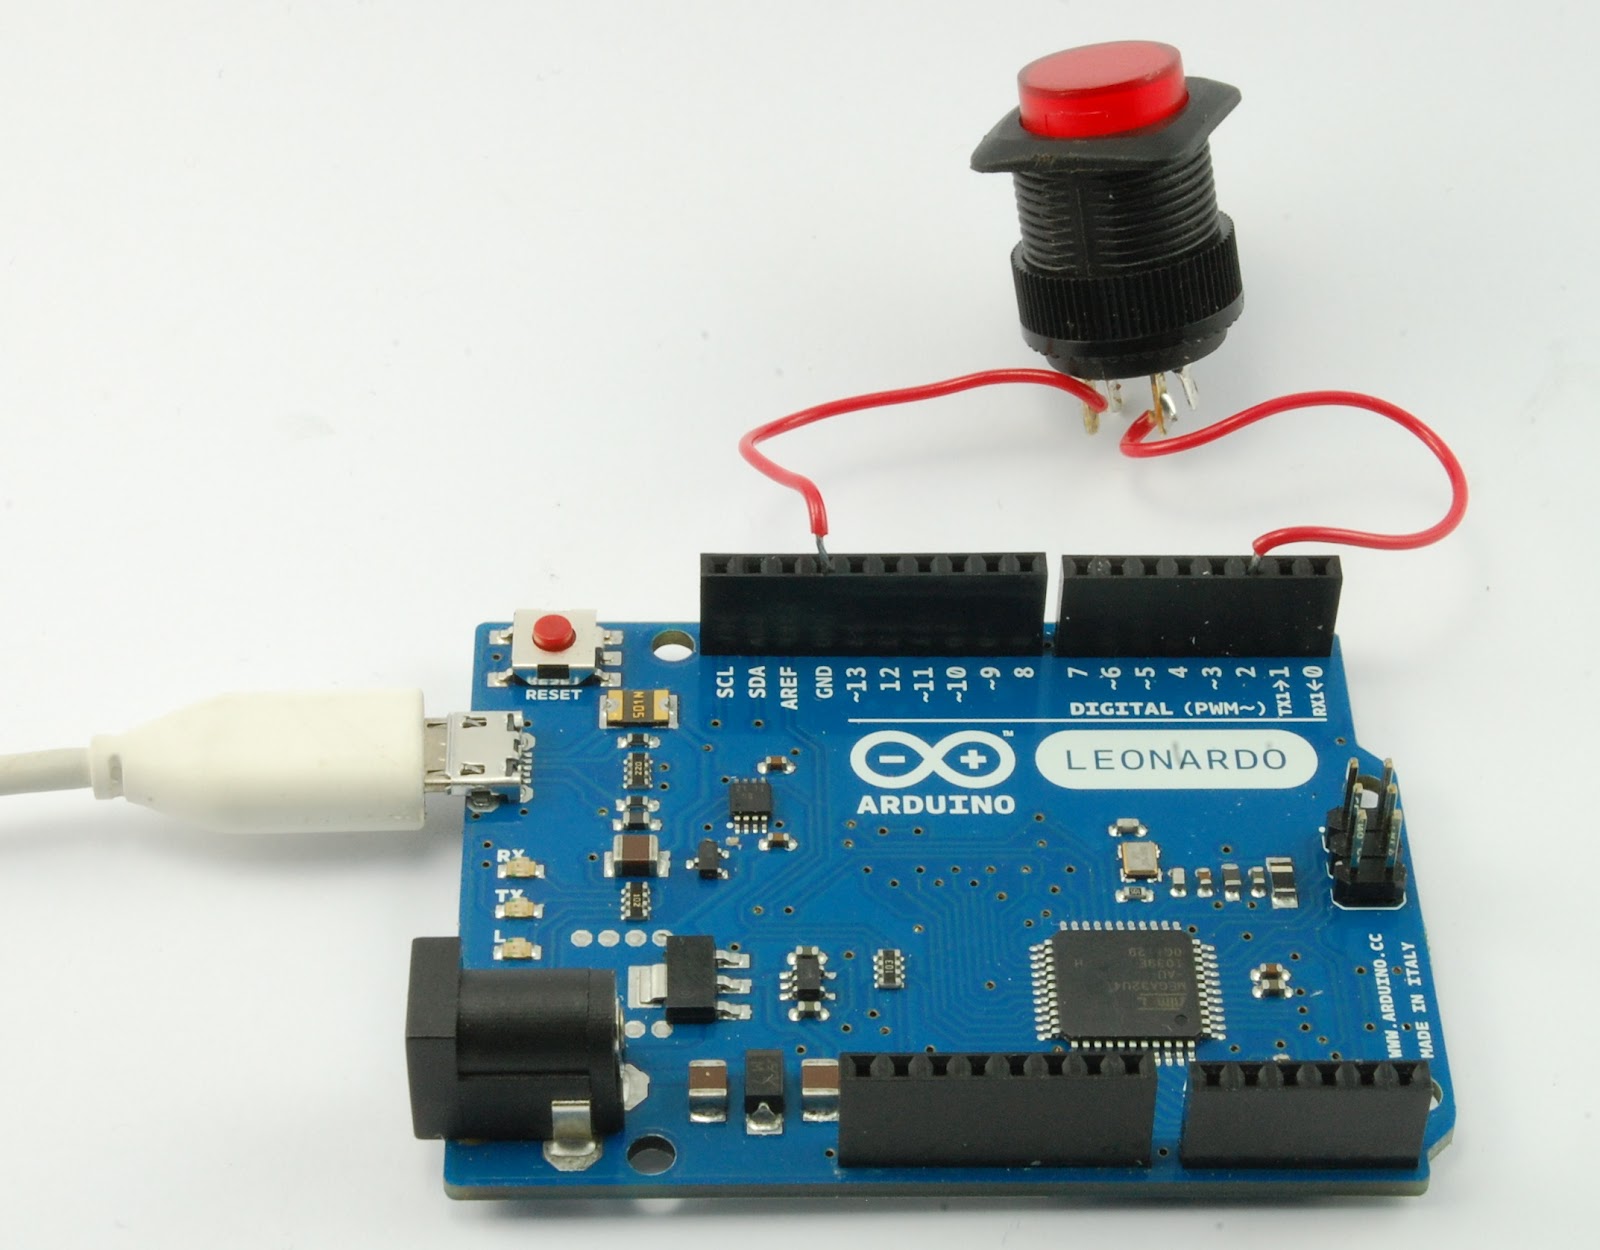 Which is the best to use between Arduino Leonardo and Arduino UNO - RAYPCB